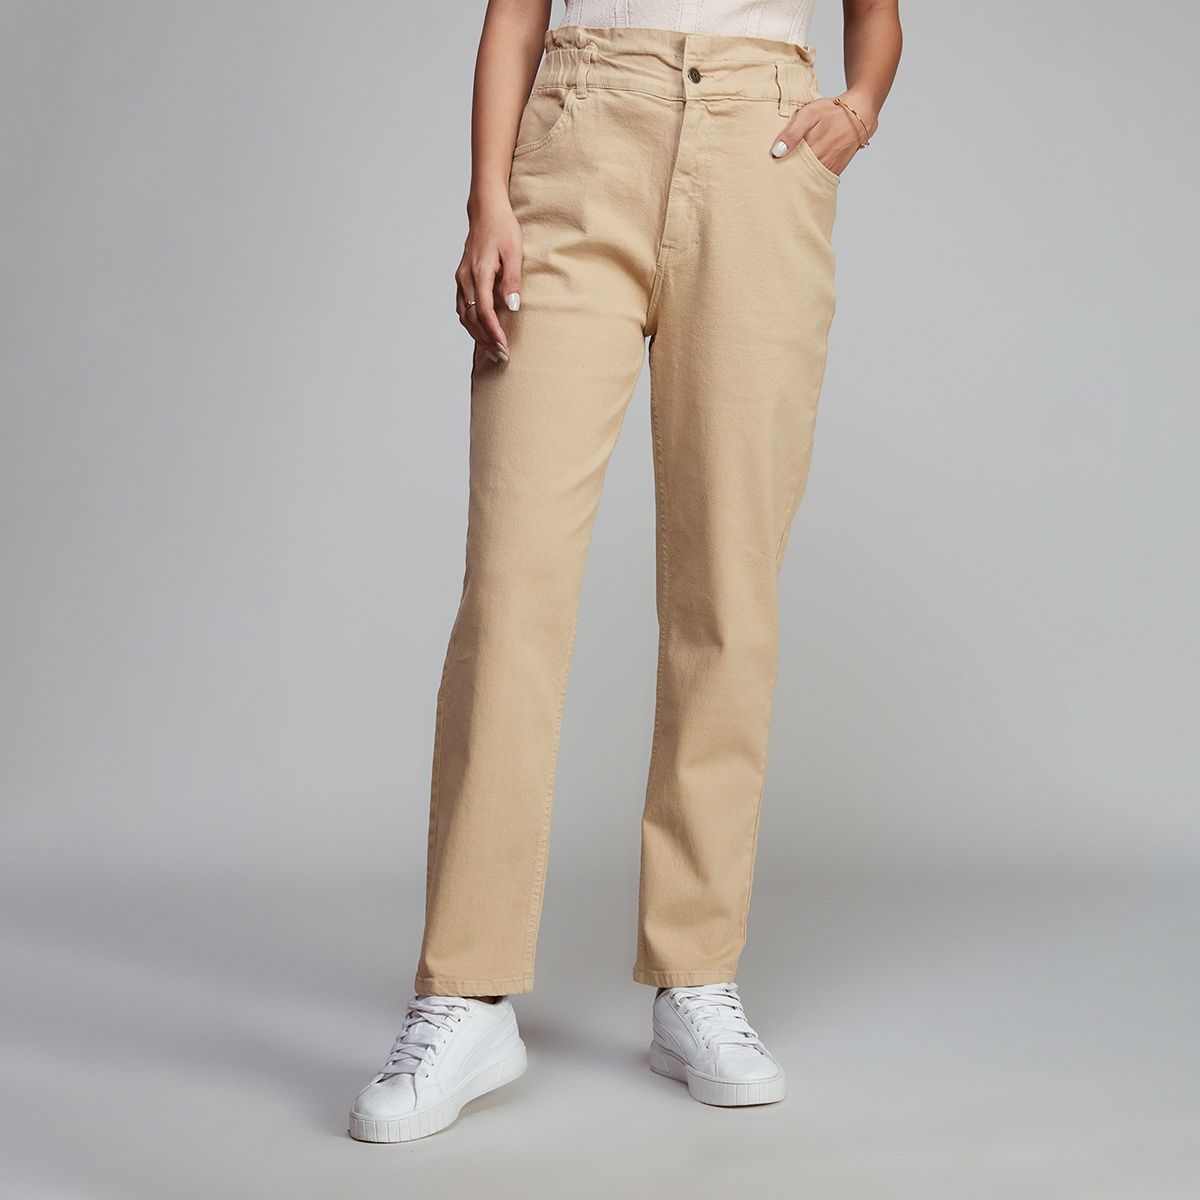 Outfits With Khaki Pants For Women Easy Style Guide To Follow This Year  2023  Fashion Canons